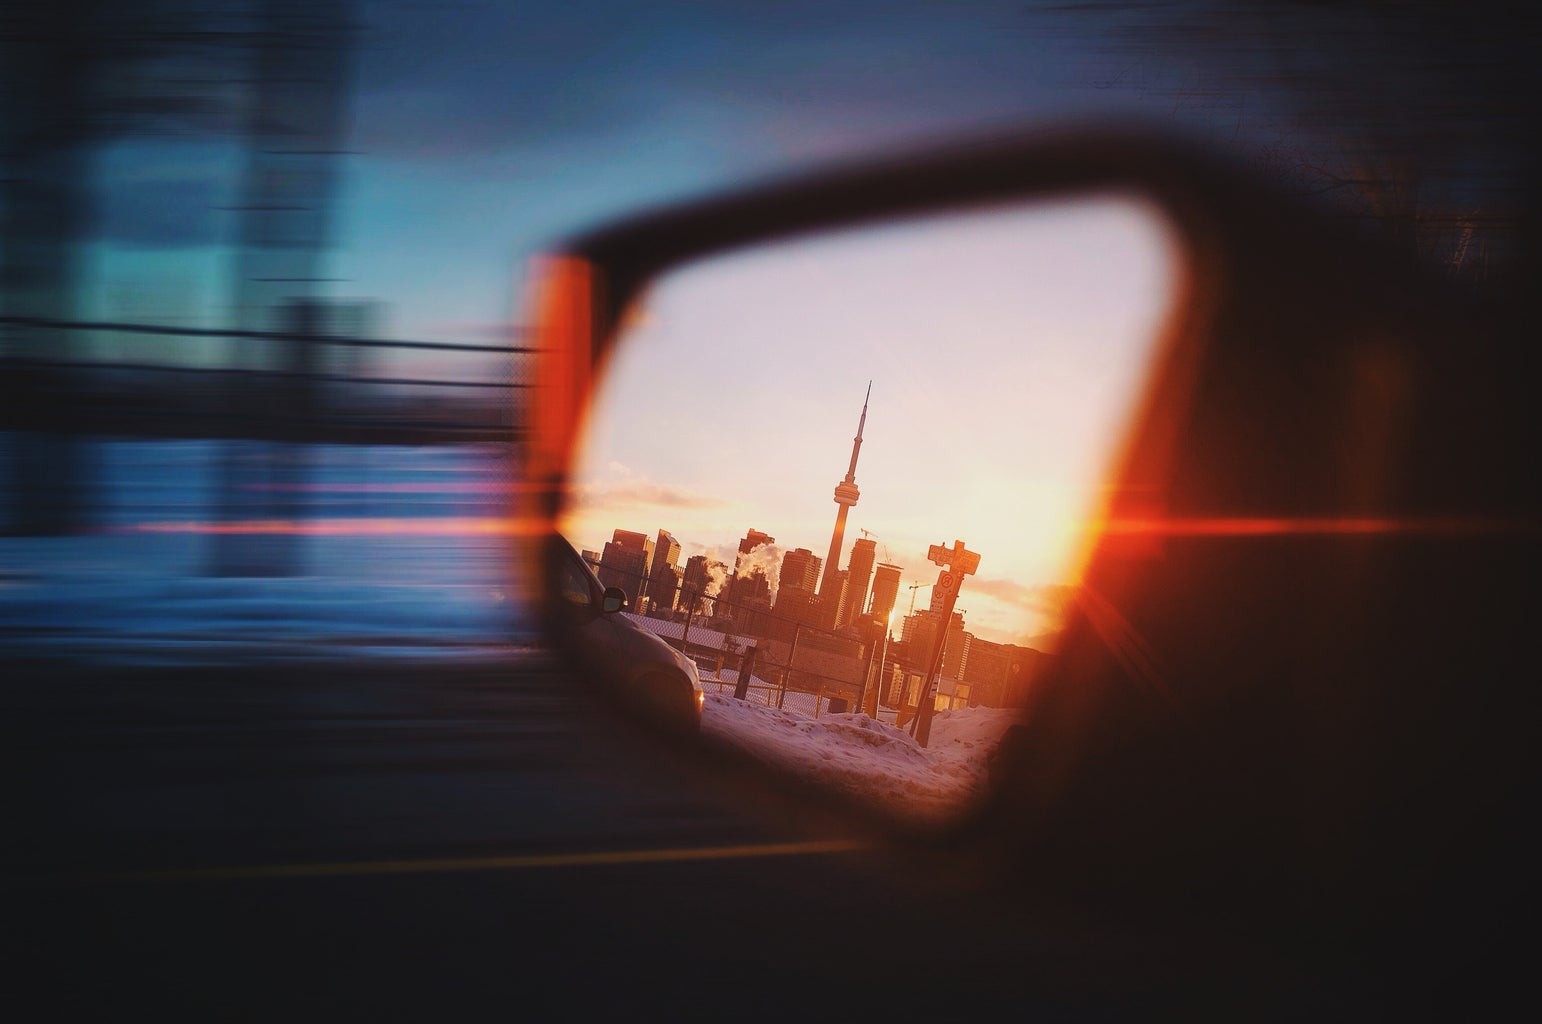 CN tower reflection in sideview mirror of moving vehicle